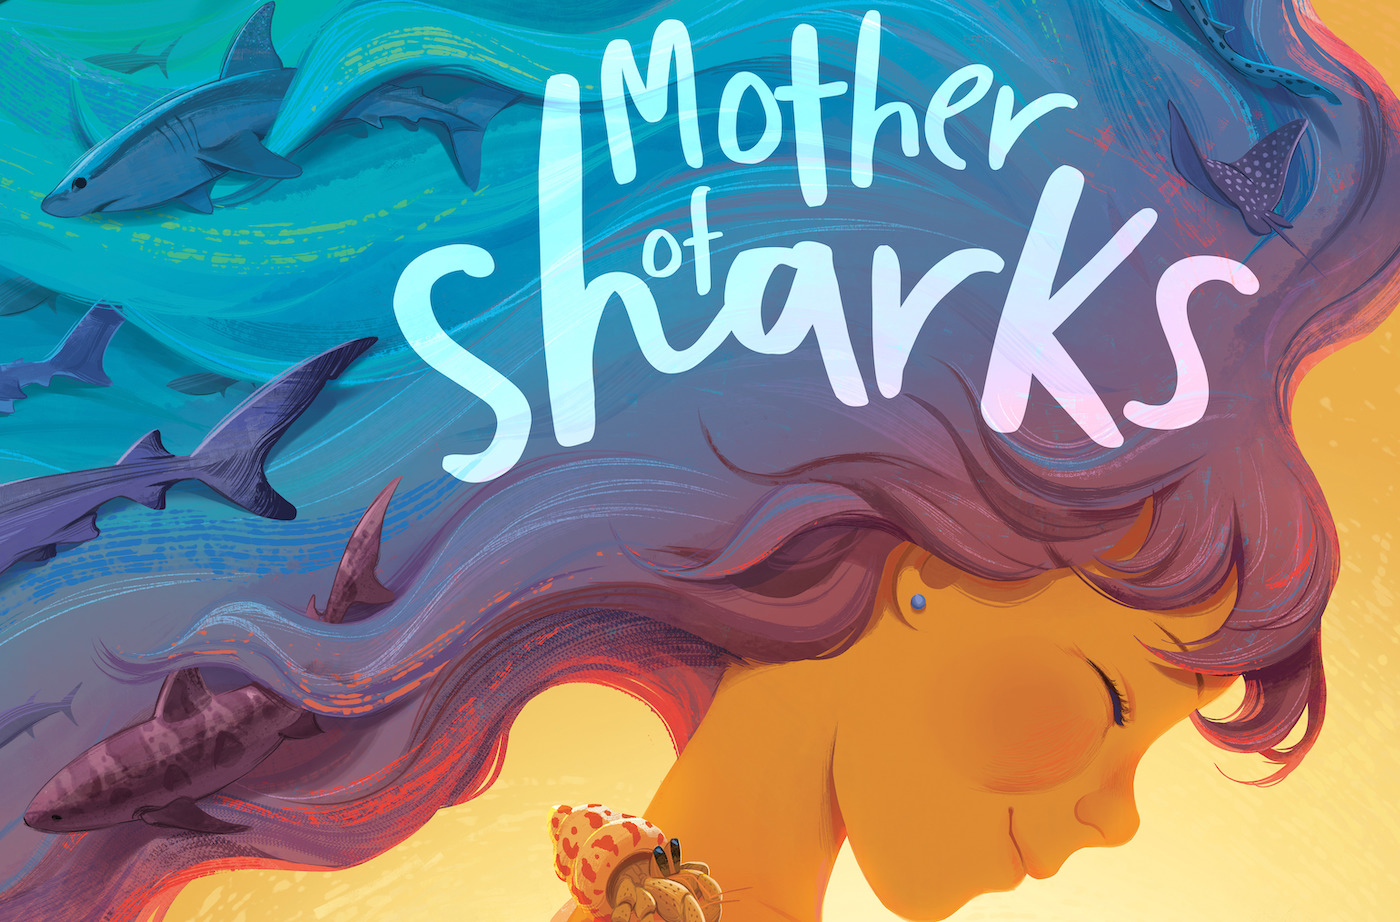 The cover of a book titled "Mother of sharks." An illustration of a girl with a crab on her shoulder looks down. Her wavy hair flows and turns into the sea